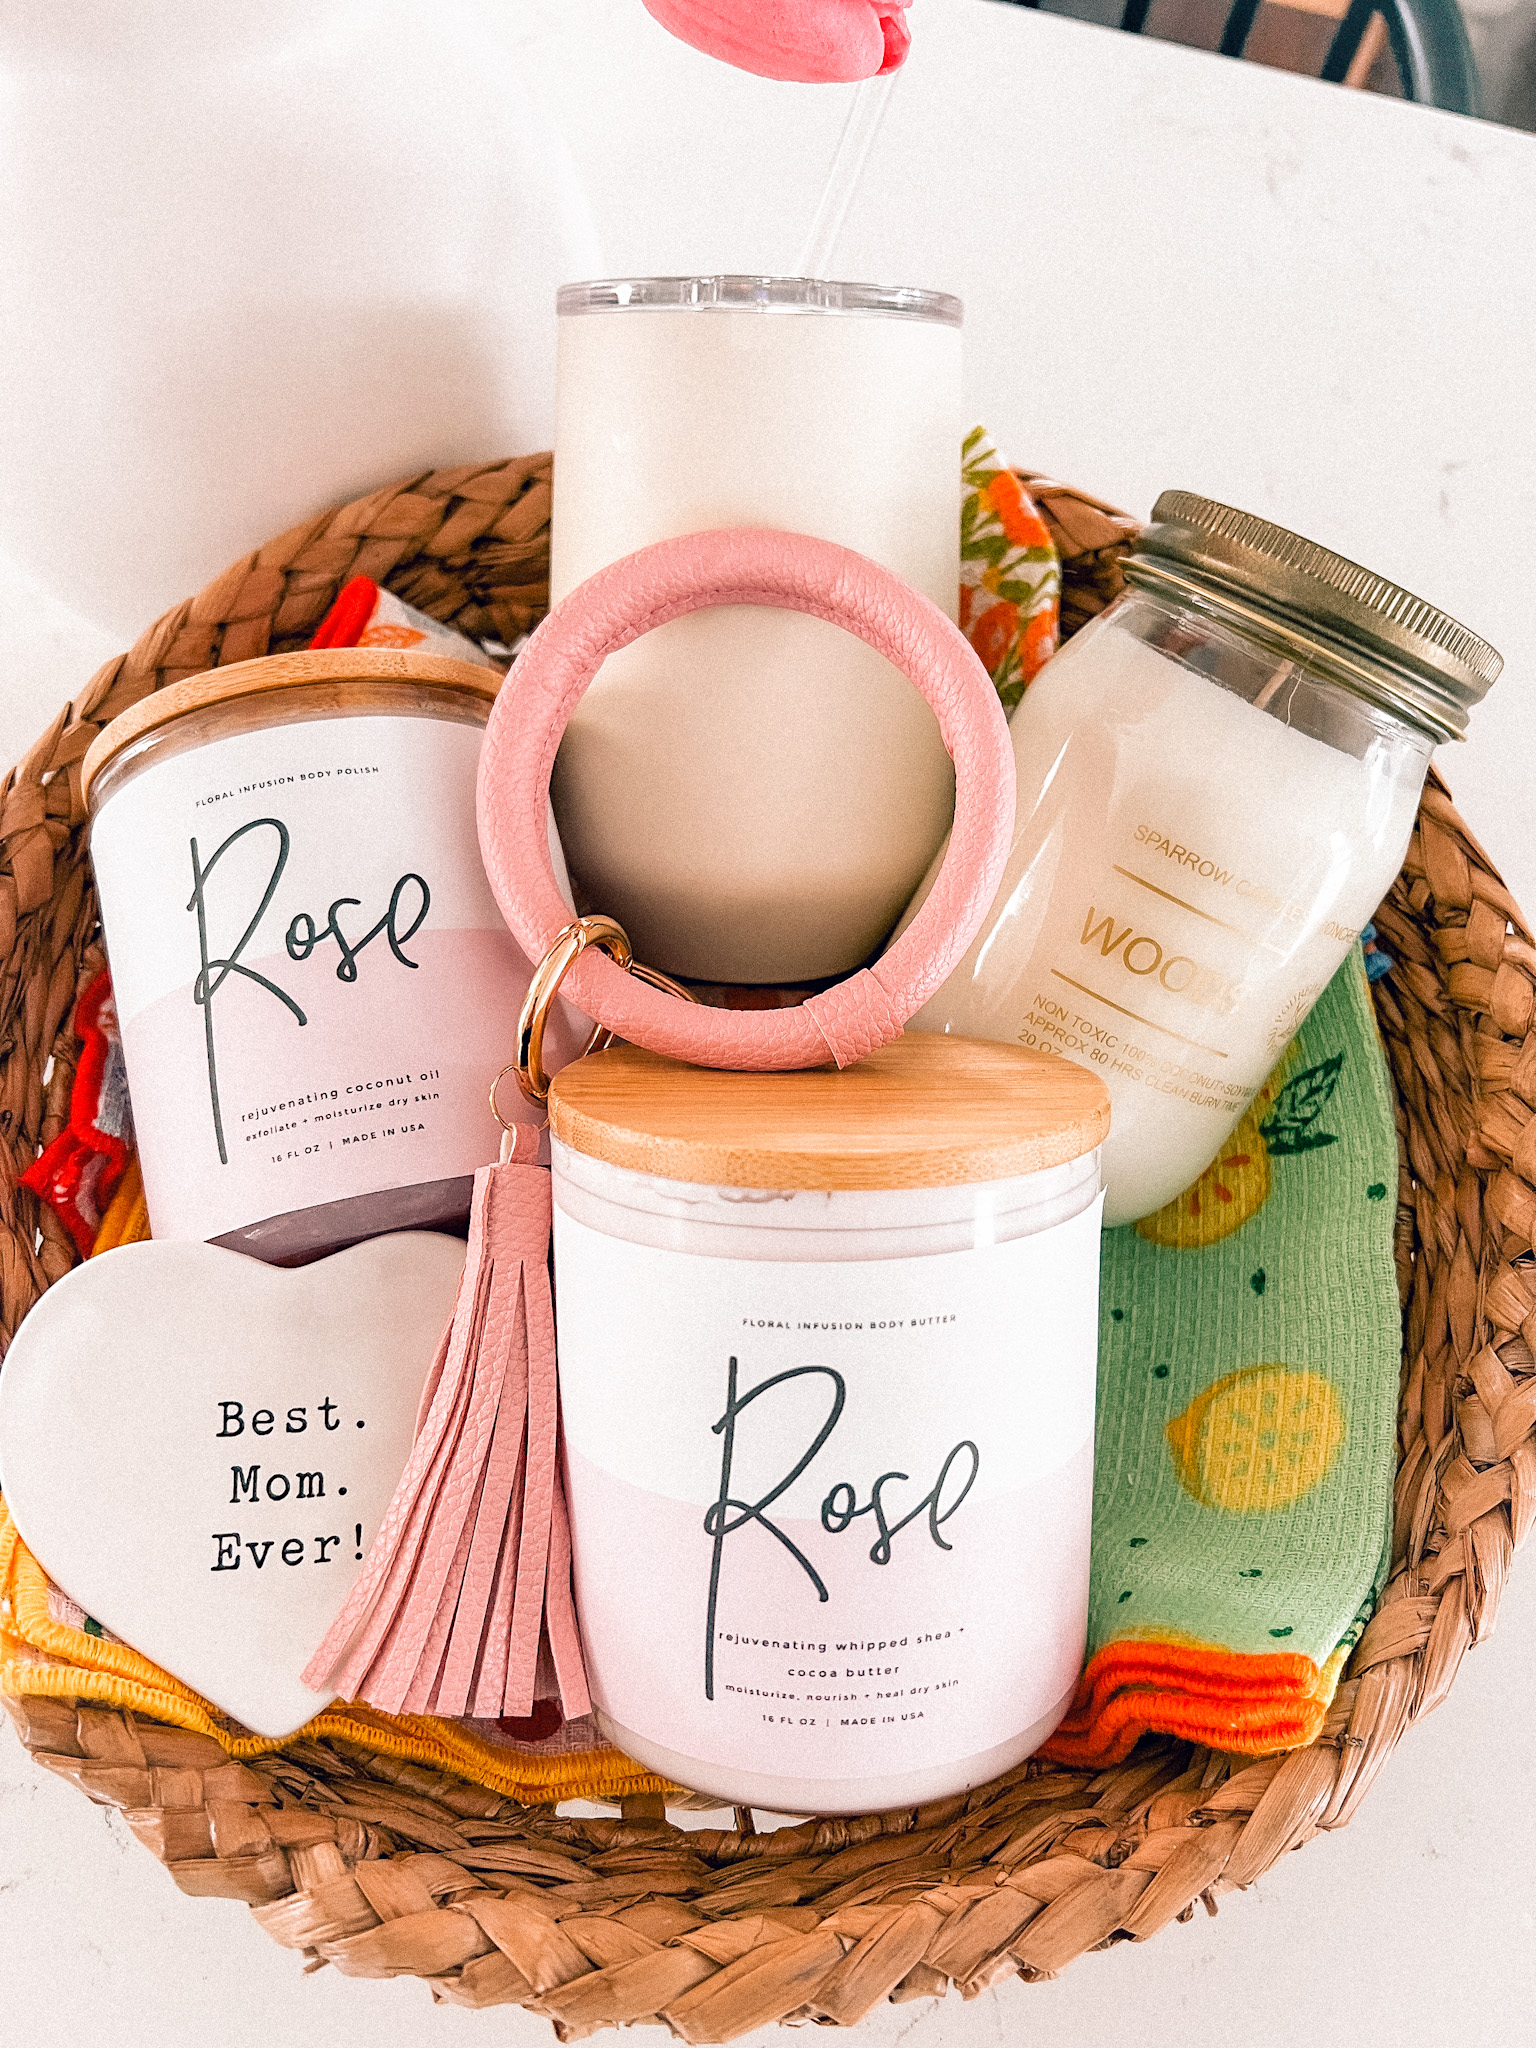 rose body butter and body polish gift idea